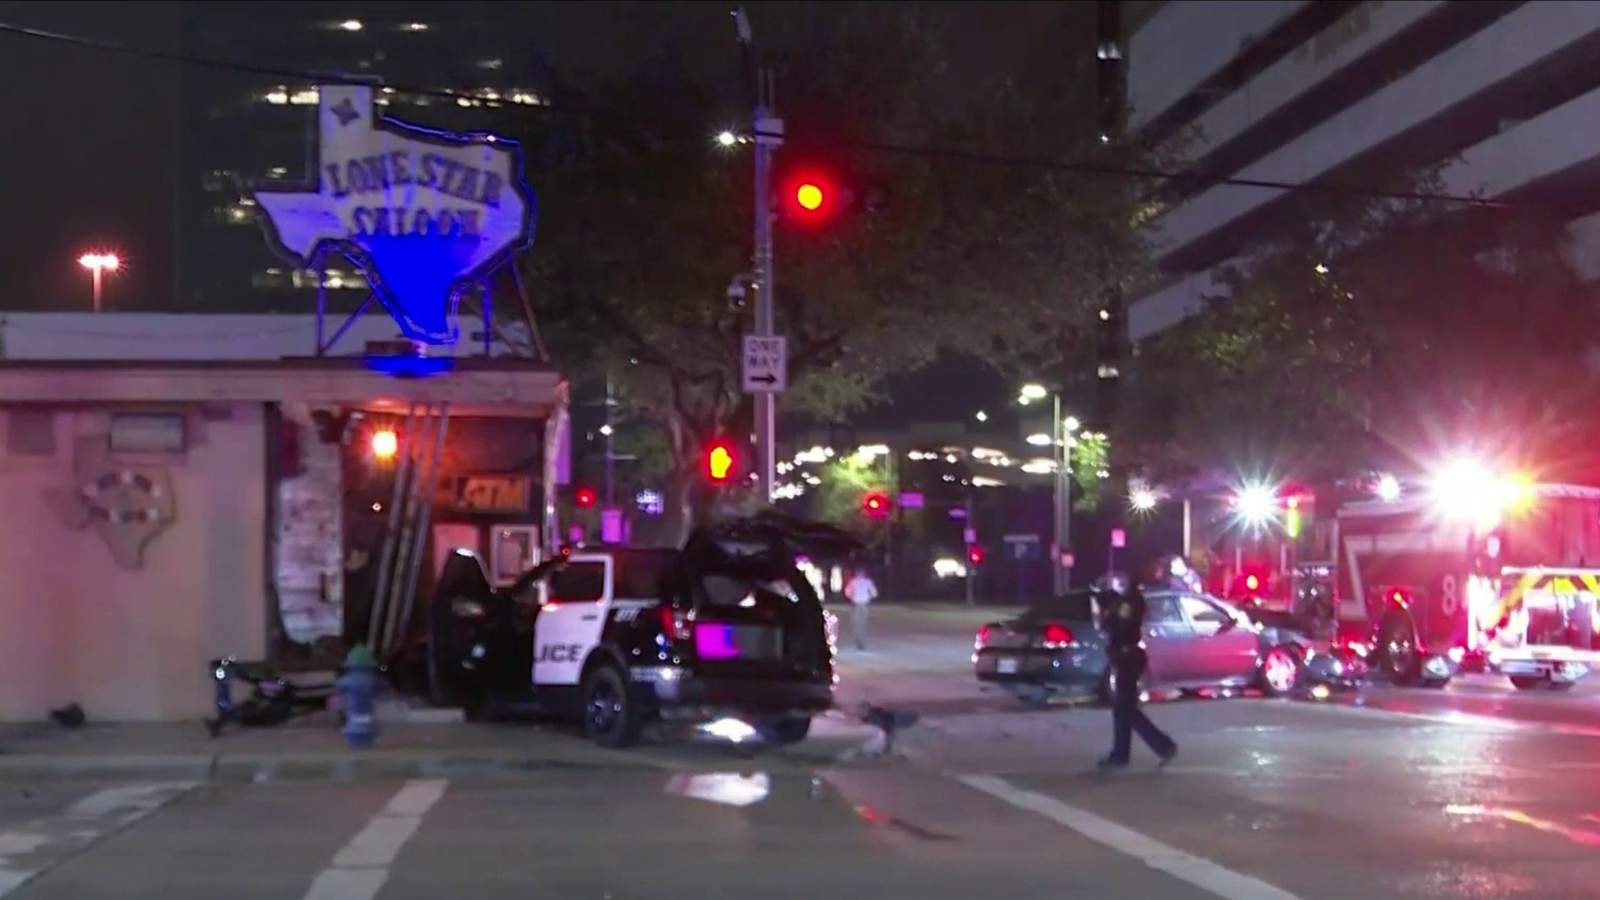 2 HPD officers injured after wrong-way driver strikes patrol vehicle in downtown Houston